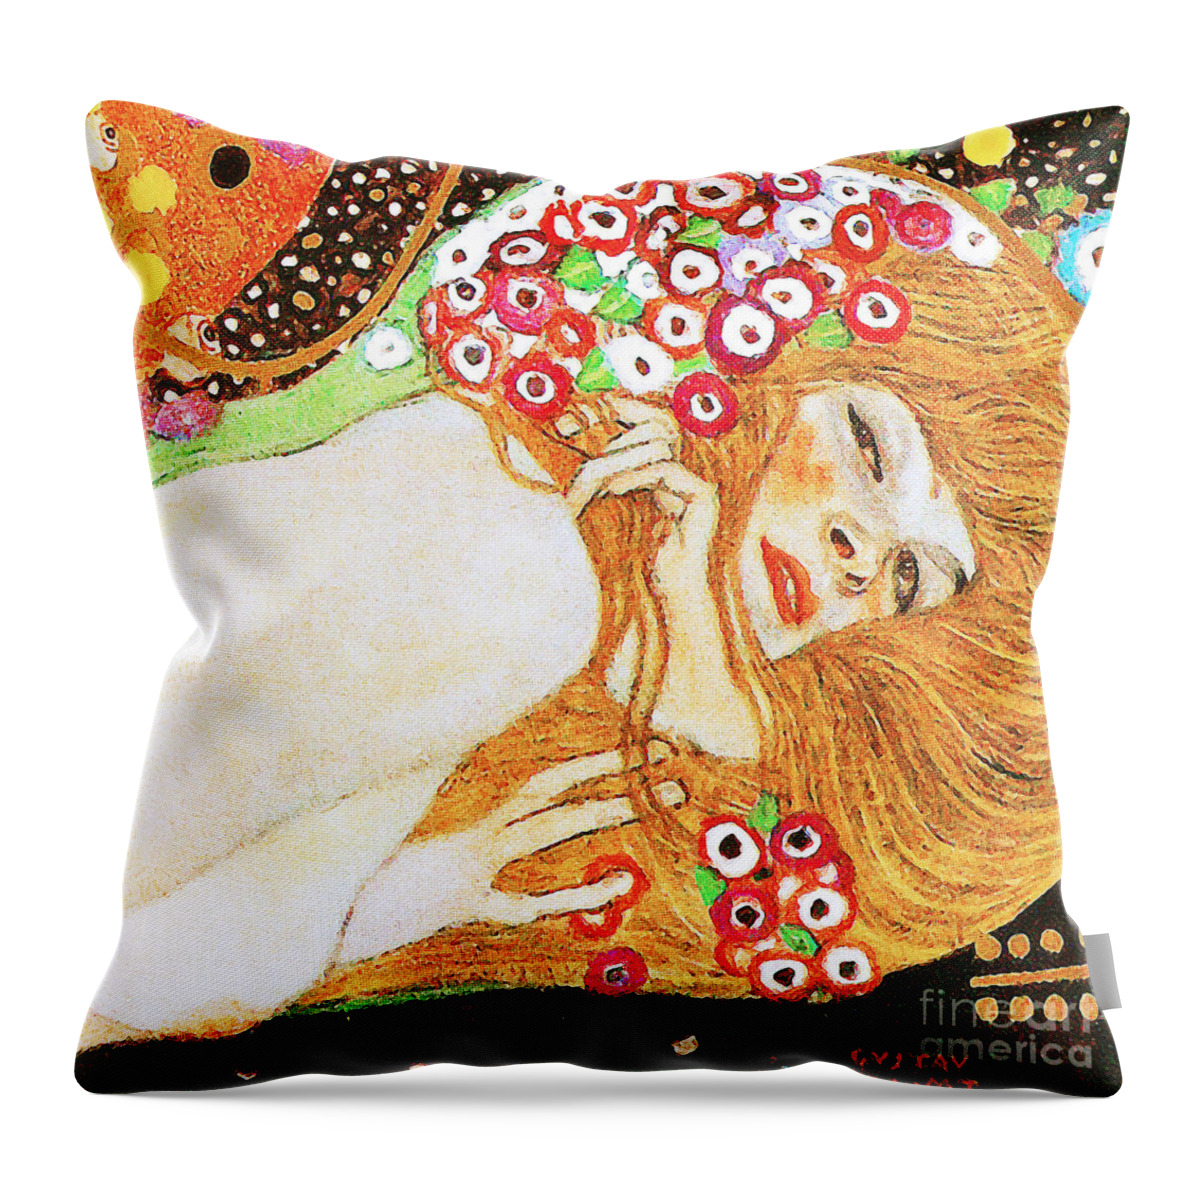 Wingsdomain Throw Pillow featuring the painting Remastered Art Water Serpents II by Gustav Klimt 20190302 square v3 by Gustav-Klimt